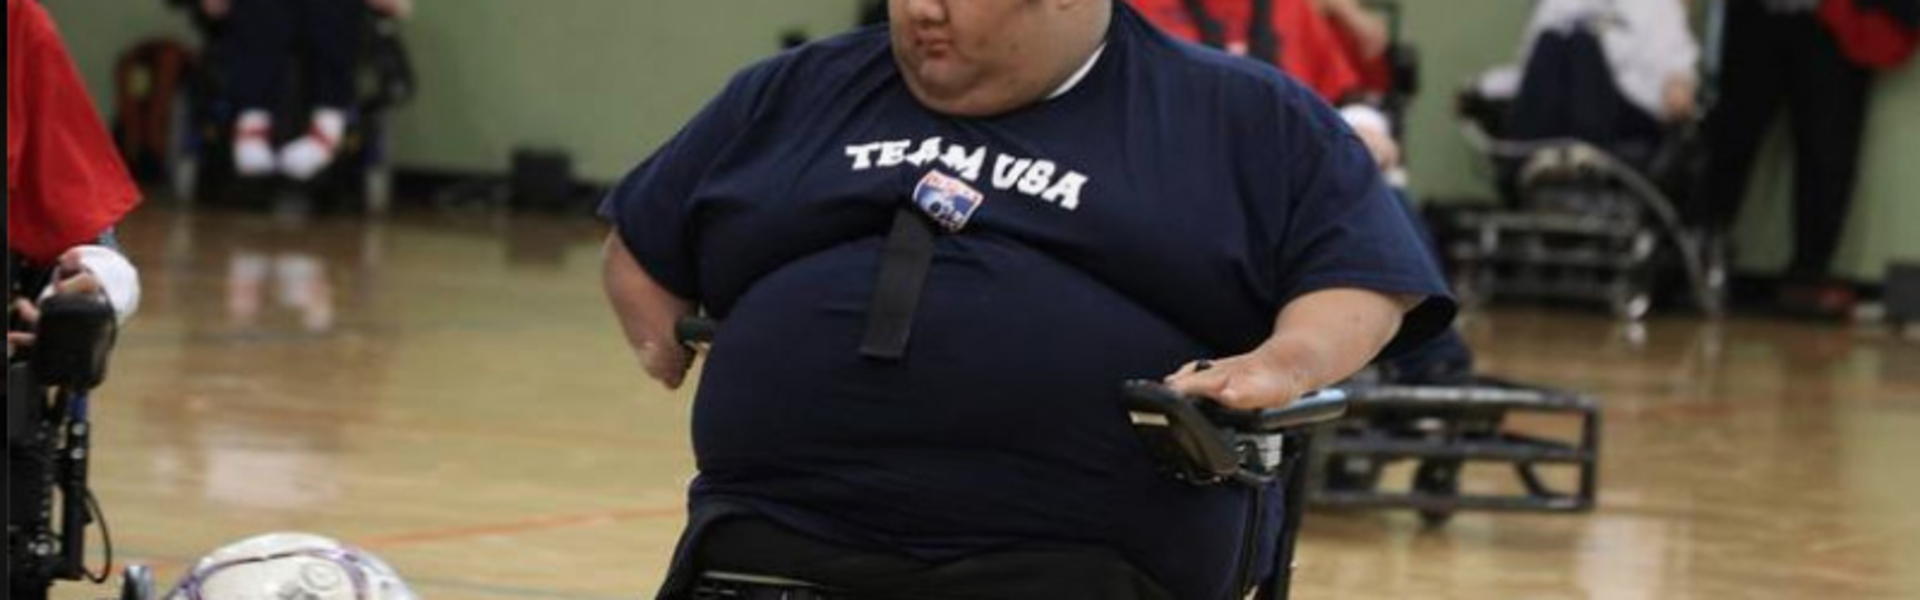 Pete Winslow playing wheelchair soccer